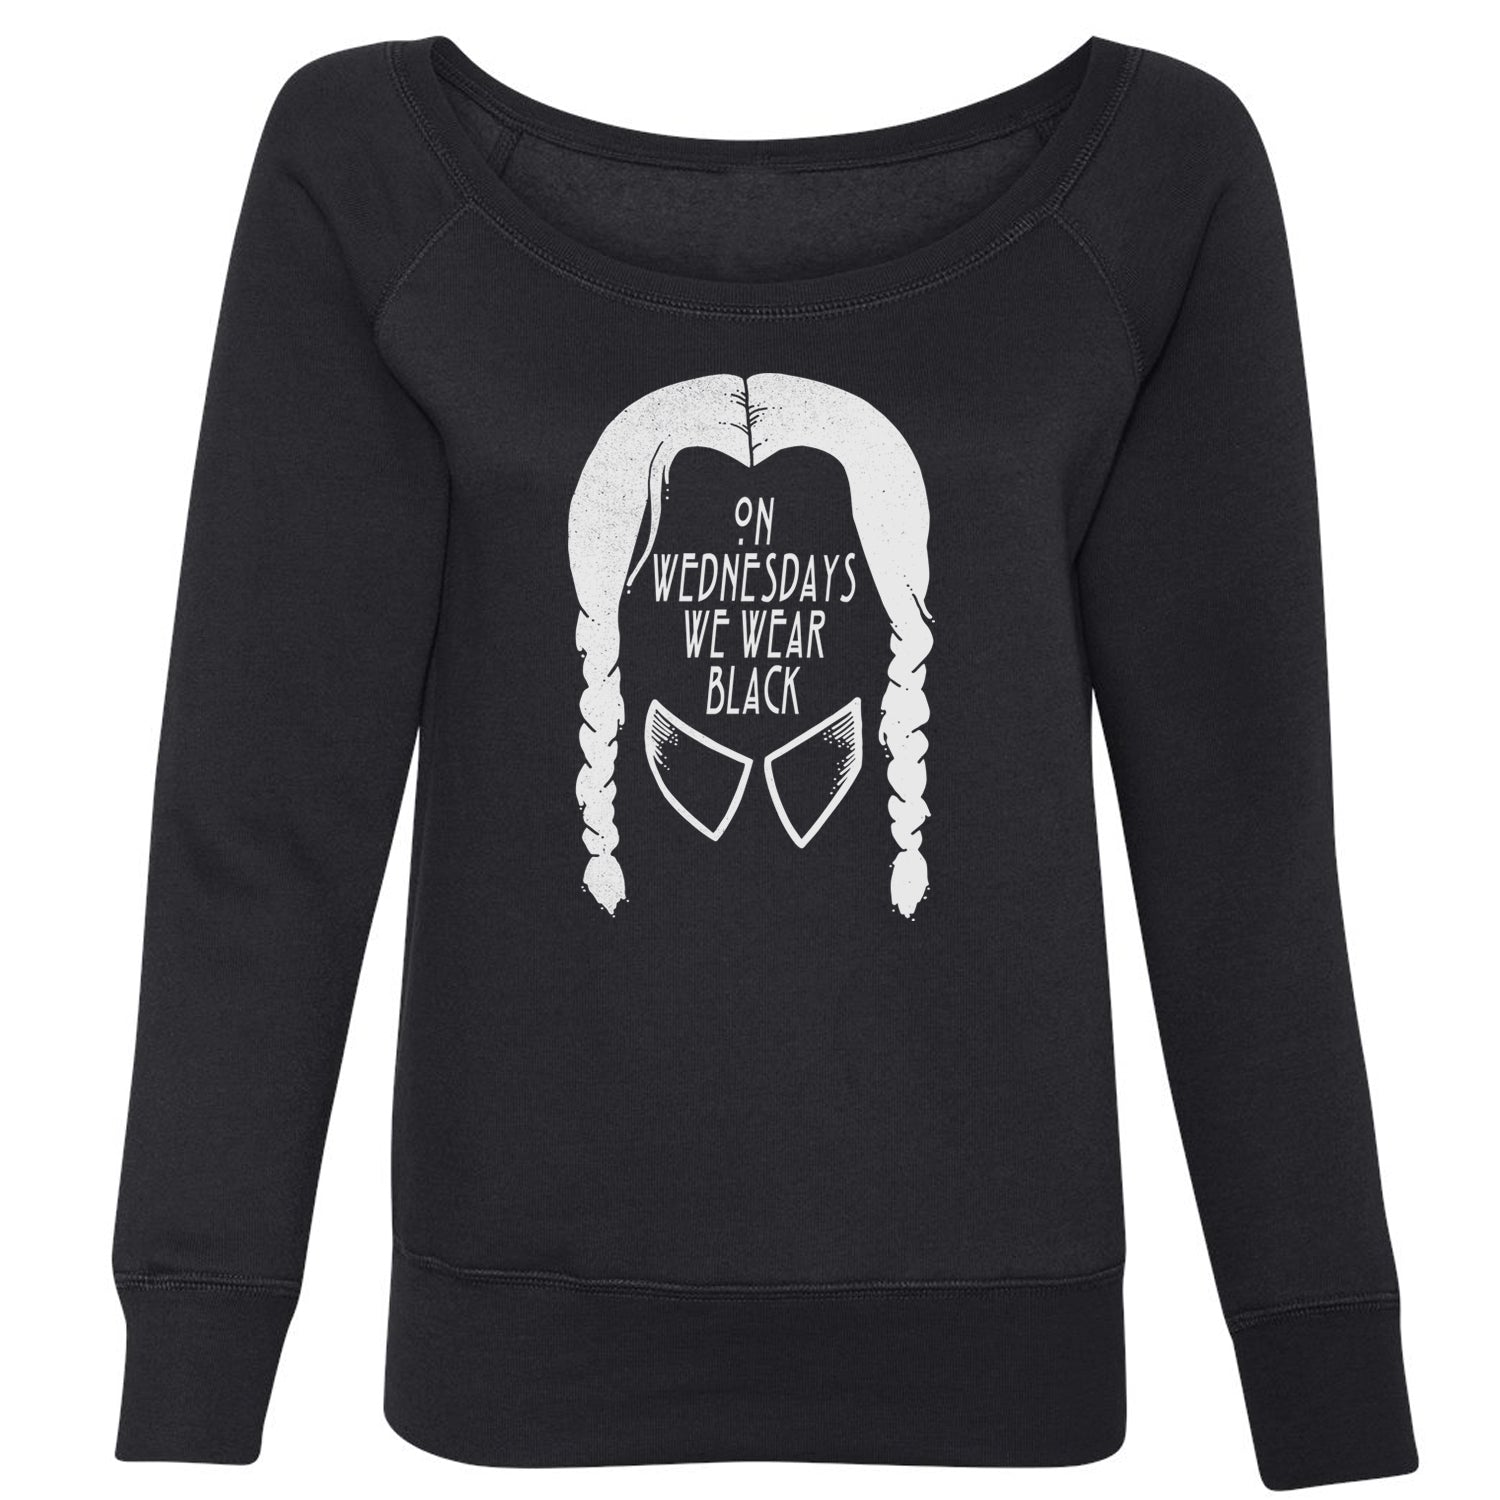 On Wednesdays, We Wear Black Slouchy Off Shoulder Oversized Sweatshirt addams, family, gomez, morticia, pugsly, ricci, Wednesday by Expression Tees